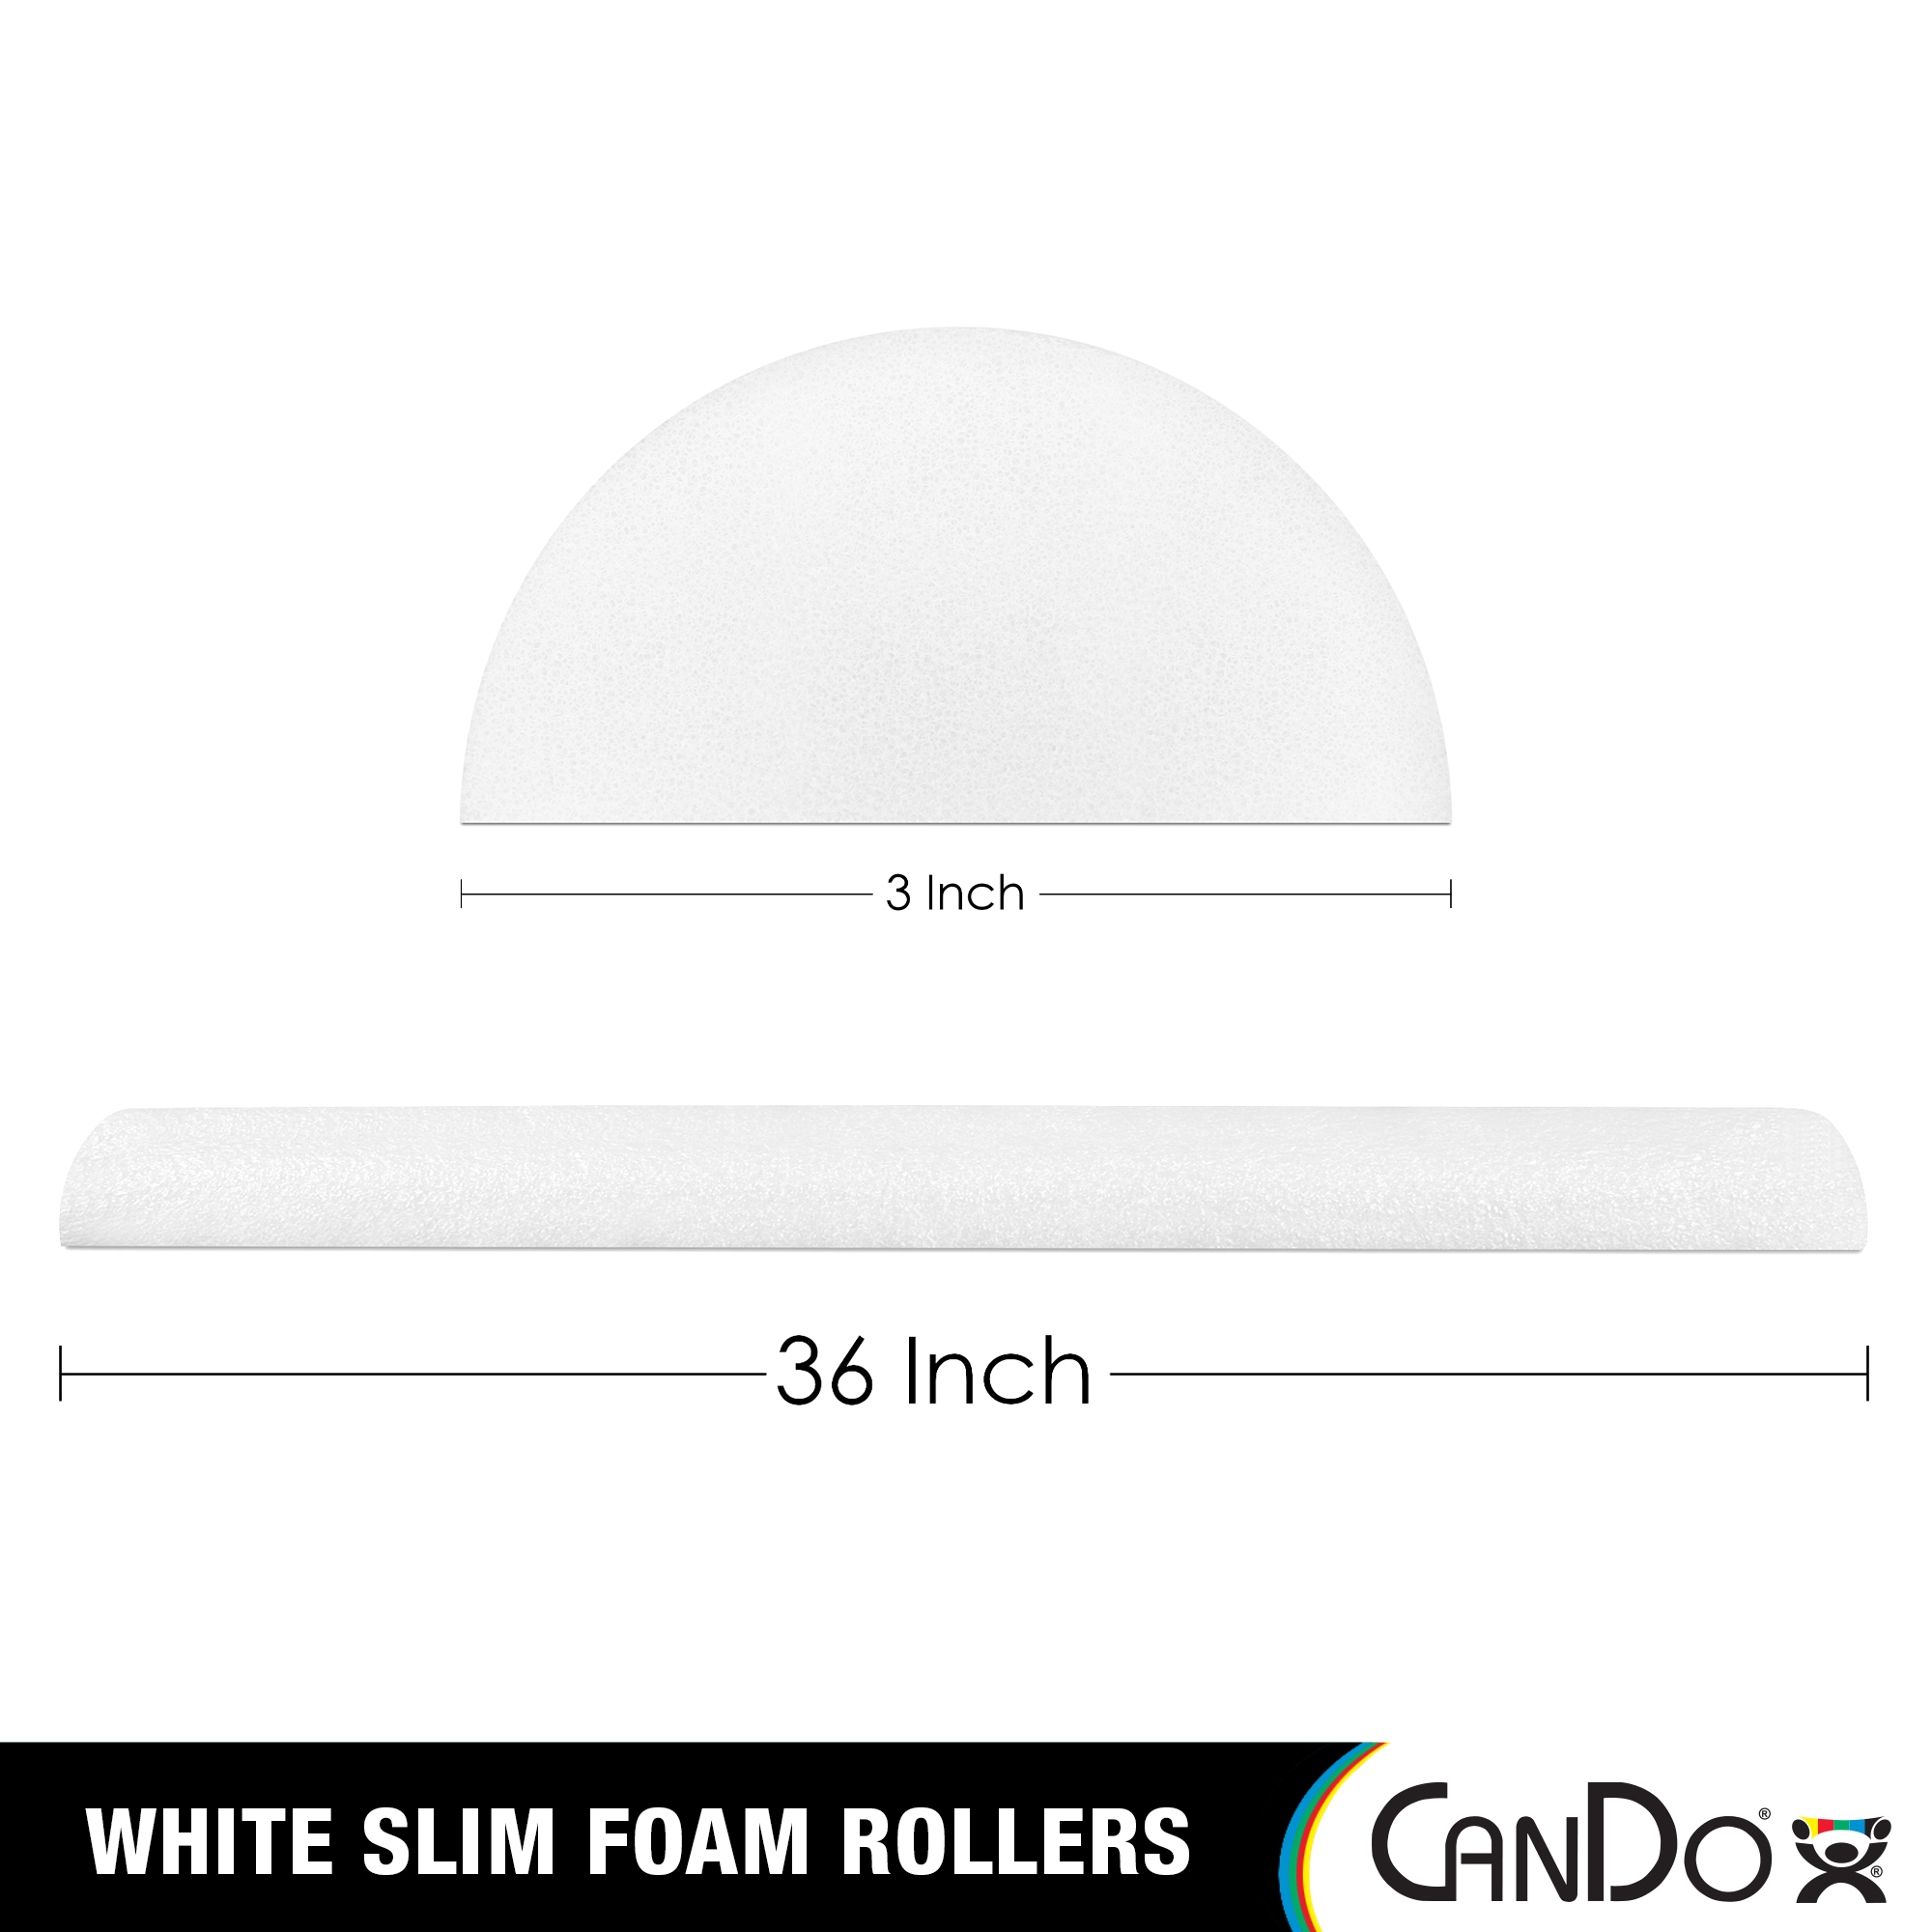 CanDo Slim White PE Foam Rollers for Exercise, Fitness, Muscle Restoration, Massage Therapy, Sport Recovery and Physical Therapy for Home, Clinics, Professional Therapy 3" x 36" Half-Round - image 2 of 6